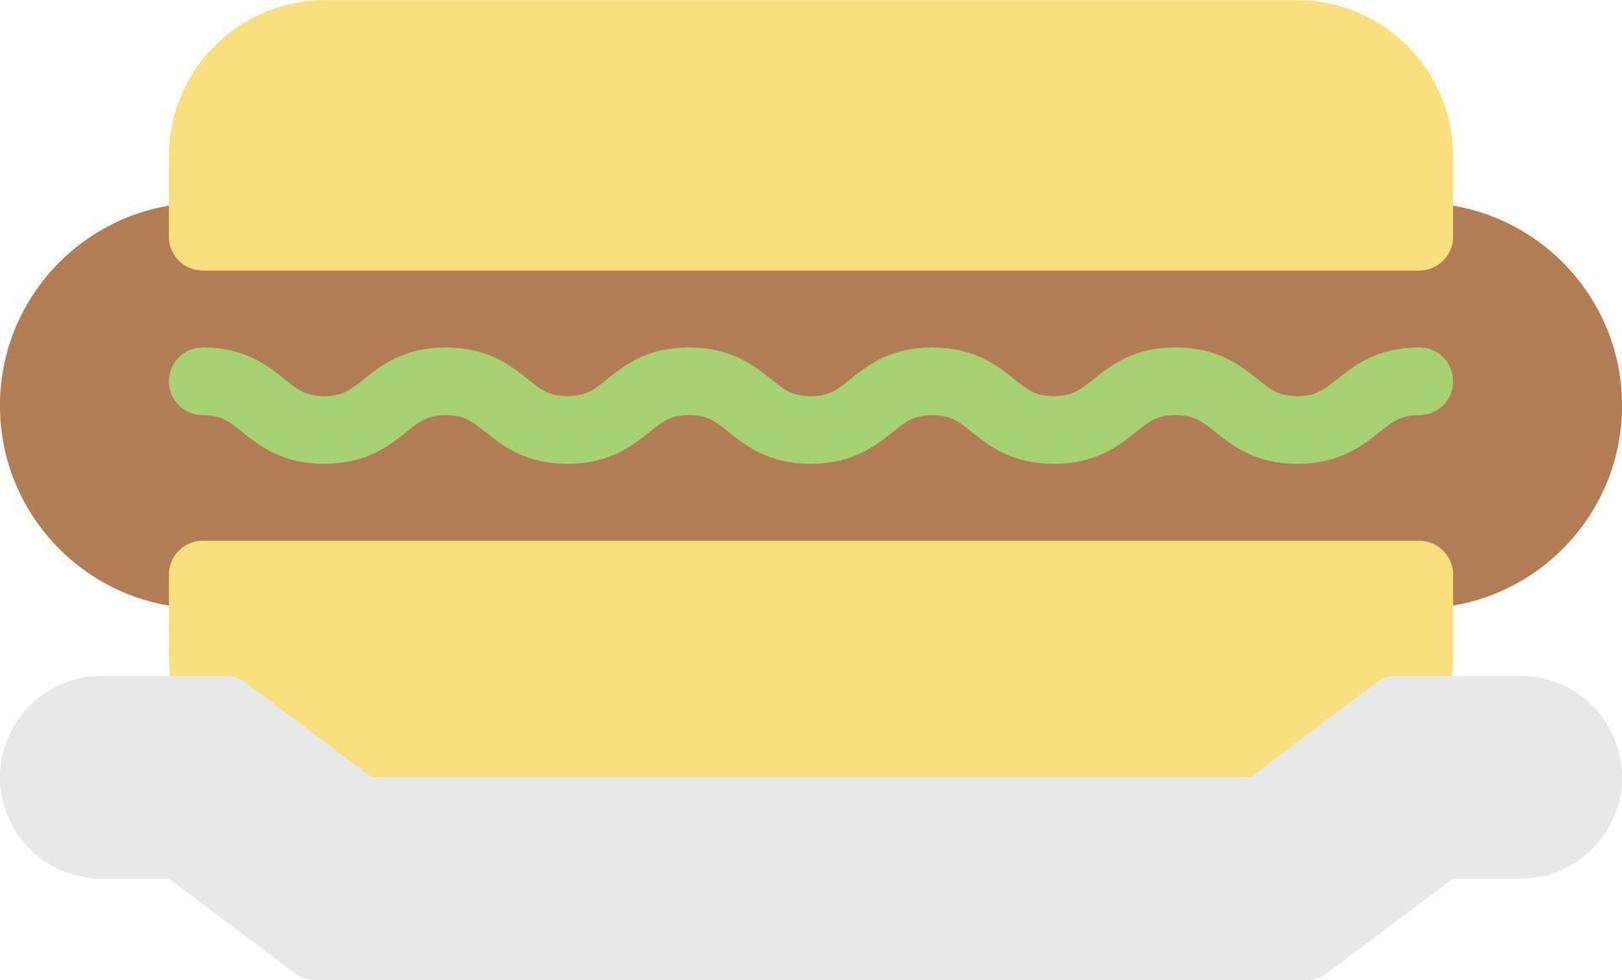 hotdog vector illustration on a background.Premium quality symbols.vector icons for concept and graphic design.